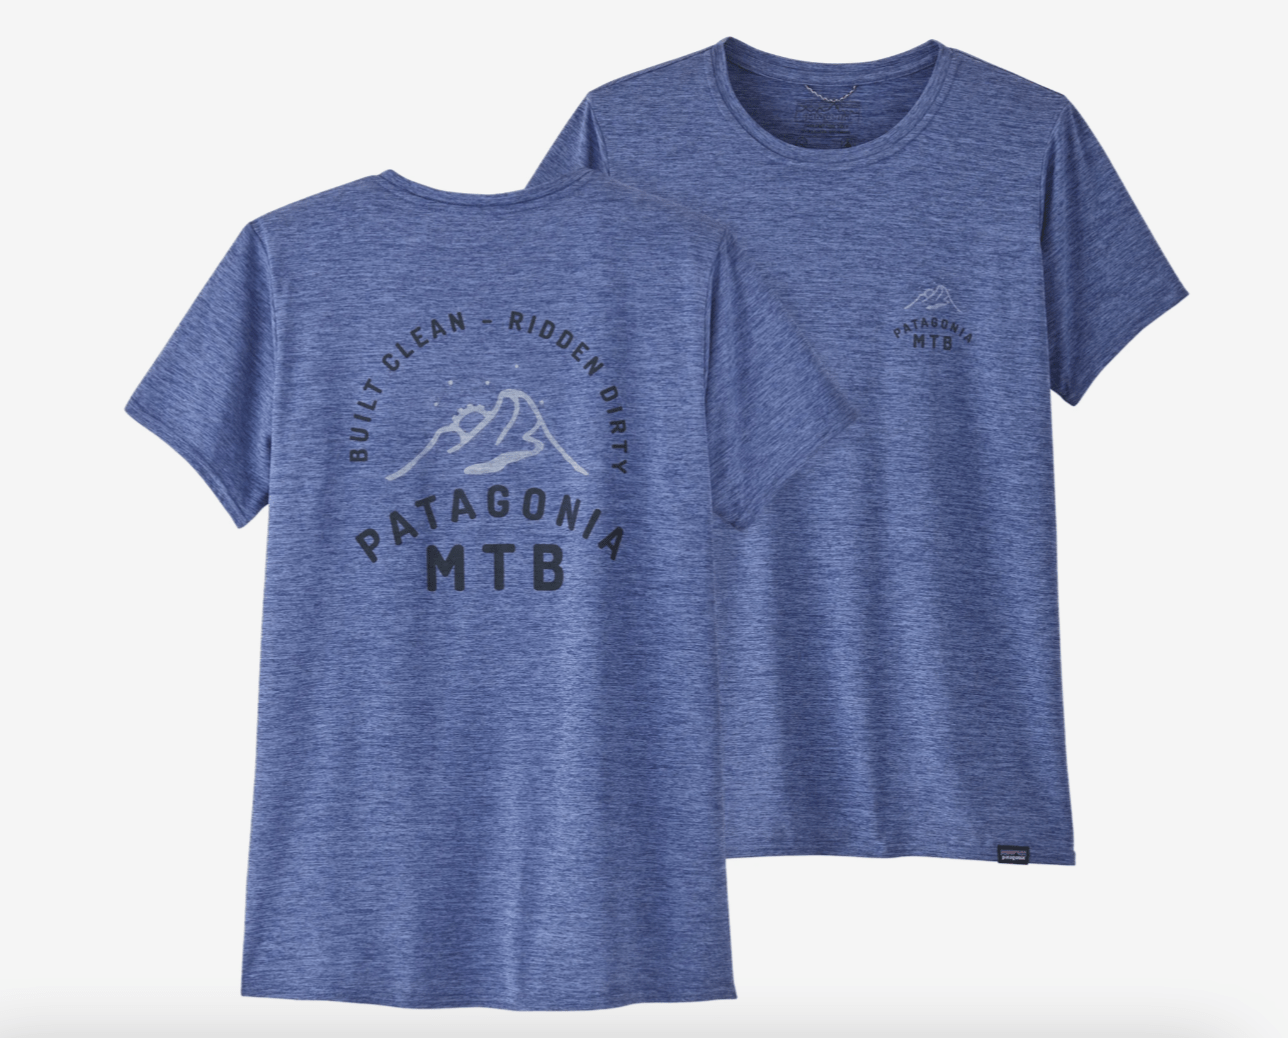 Patagonia T-Shirt S / MTB Crest: Current Blue X-Dye Patagonia Capilene® Cool Daily Graphic Shirt